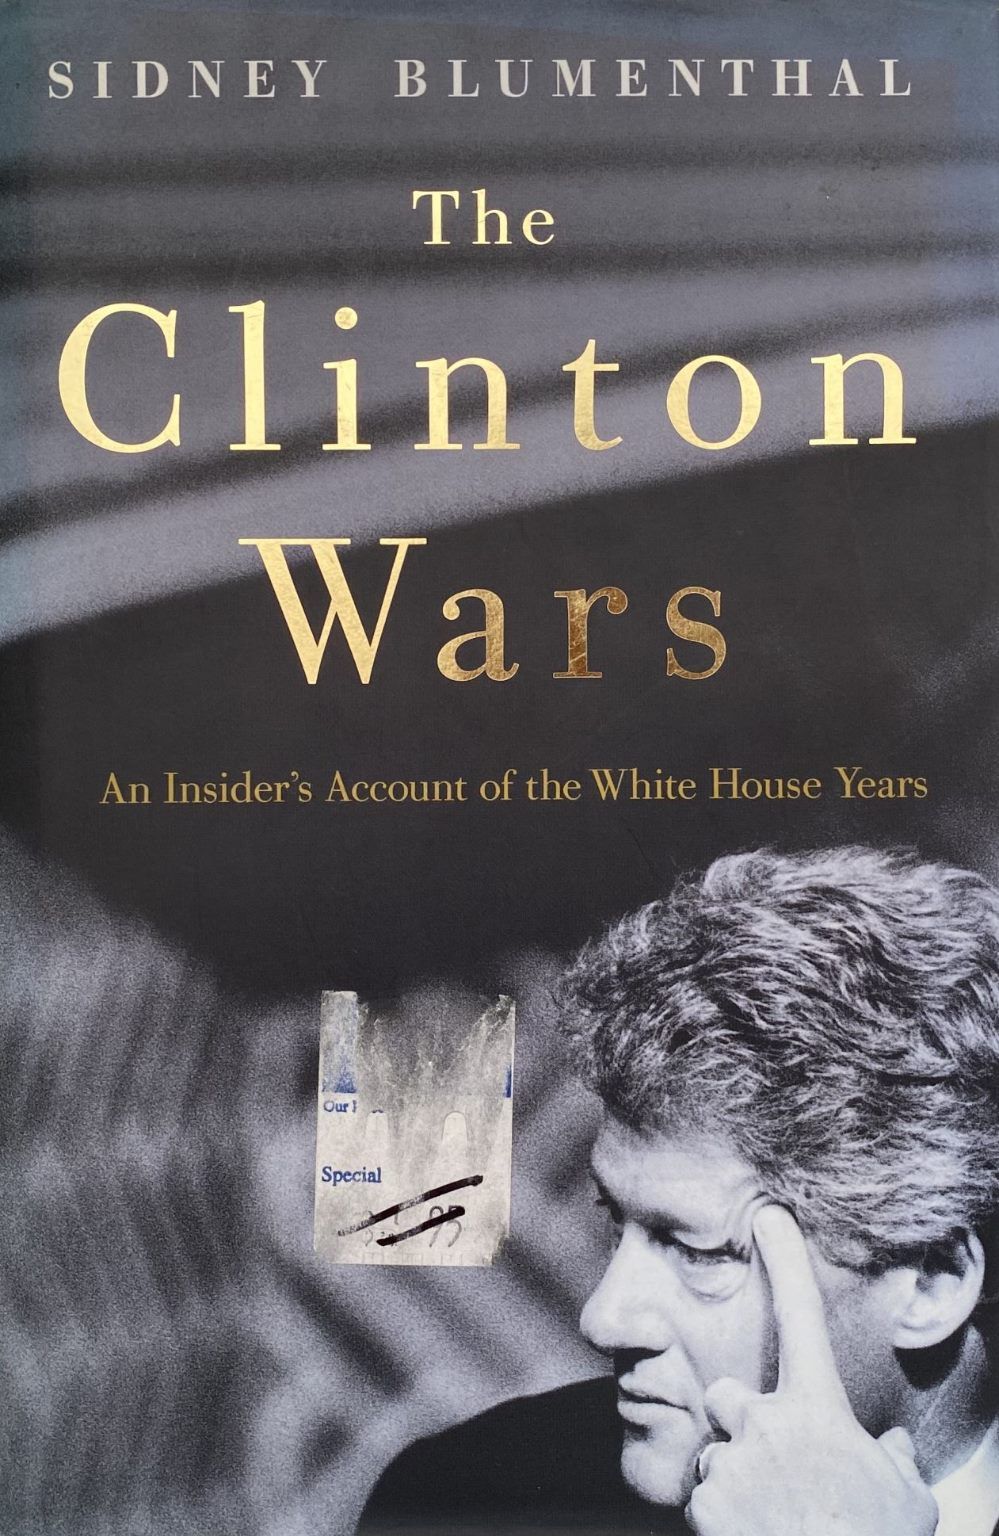 THE CLINTON WARS: An Insider's Account of the White House Years